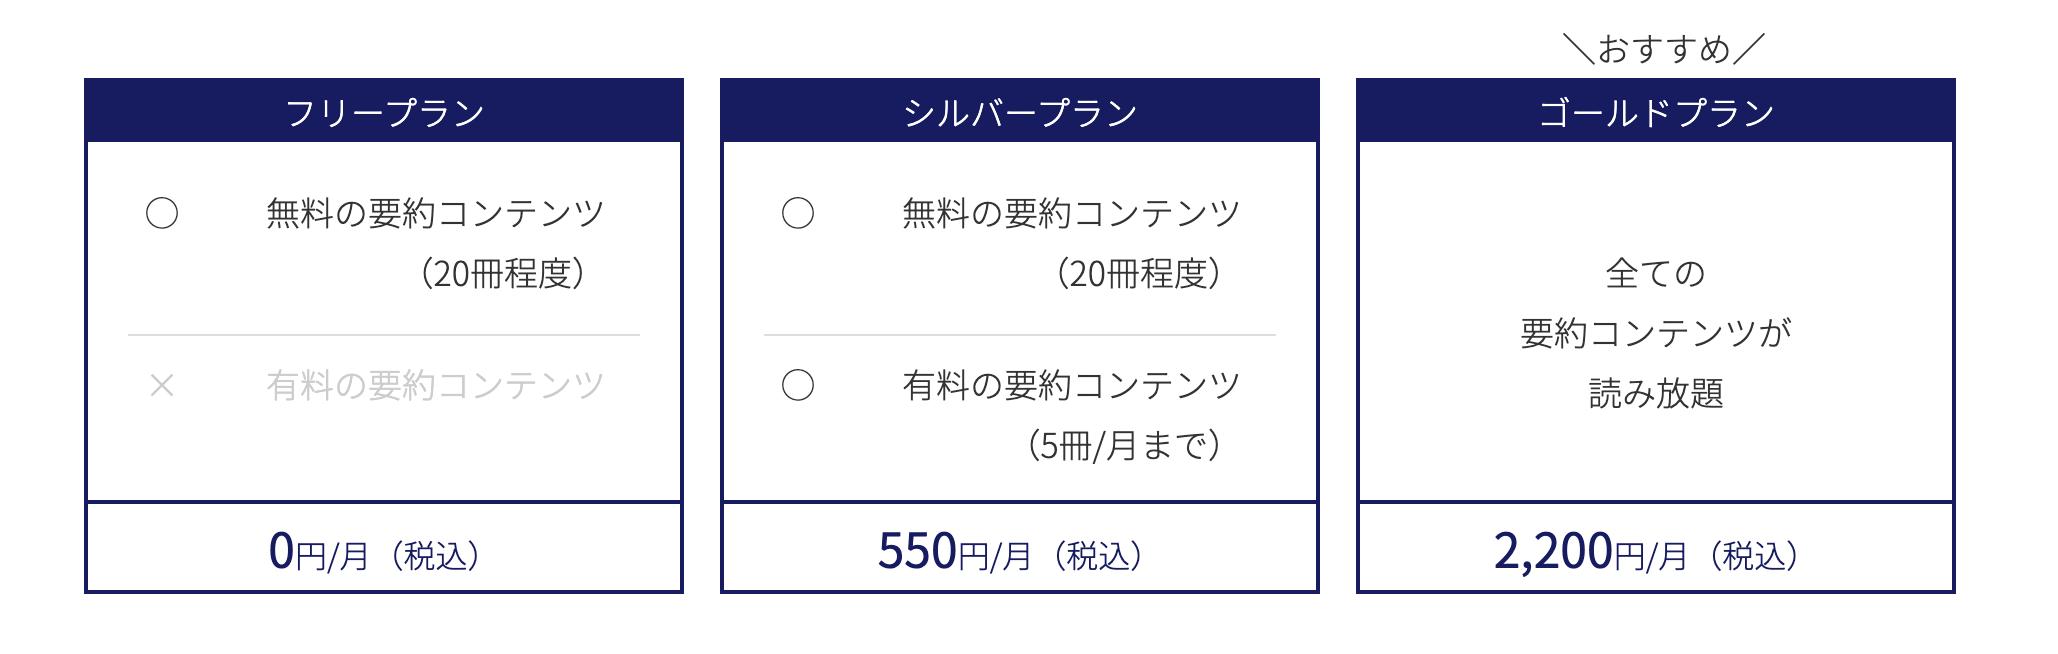 flierの料金プラン